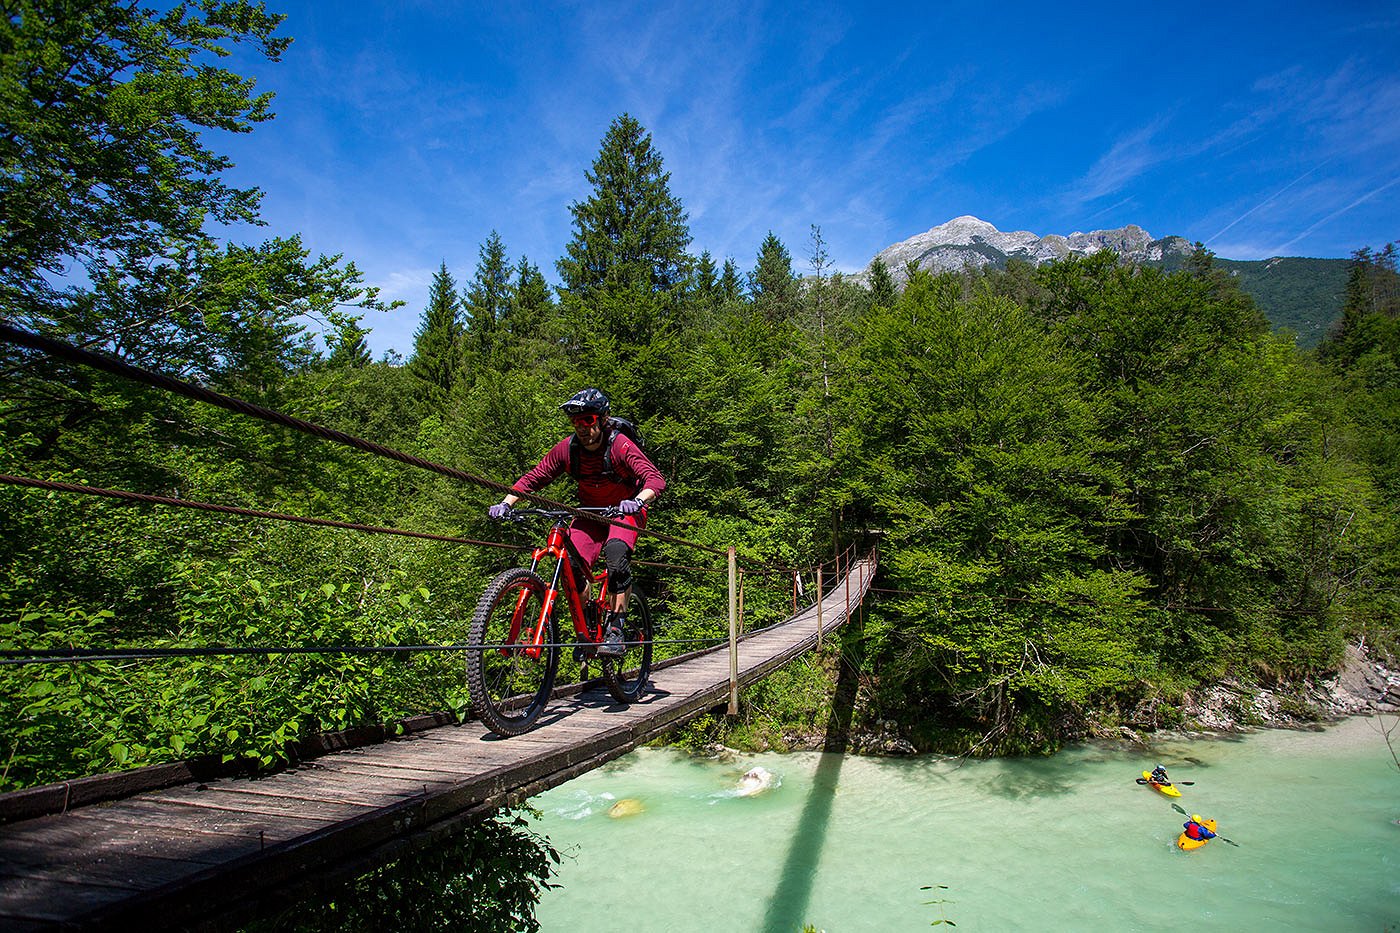 A cyclist crosses the hanging bridge over the Soča River, along which the kayaker descends